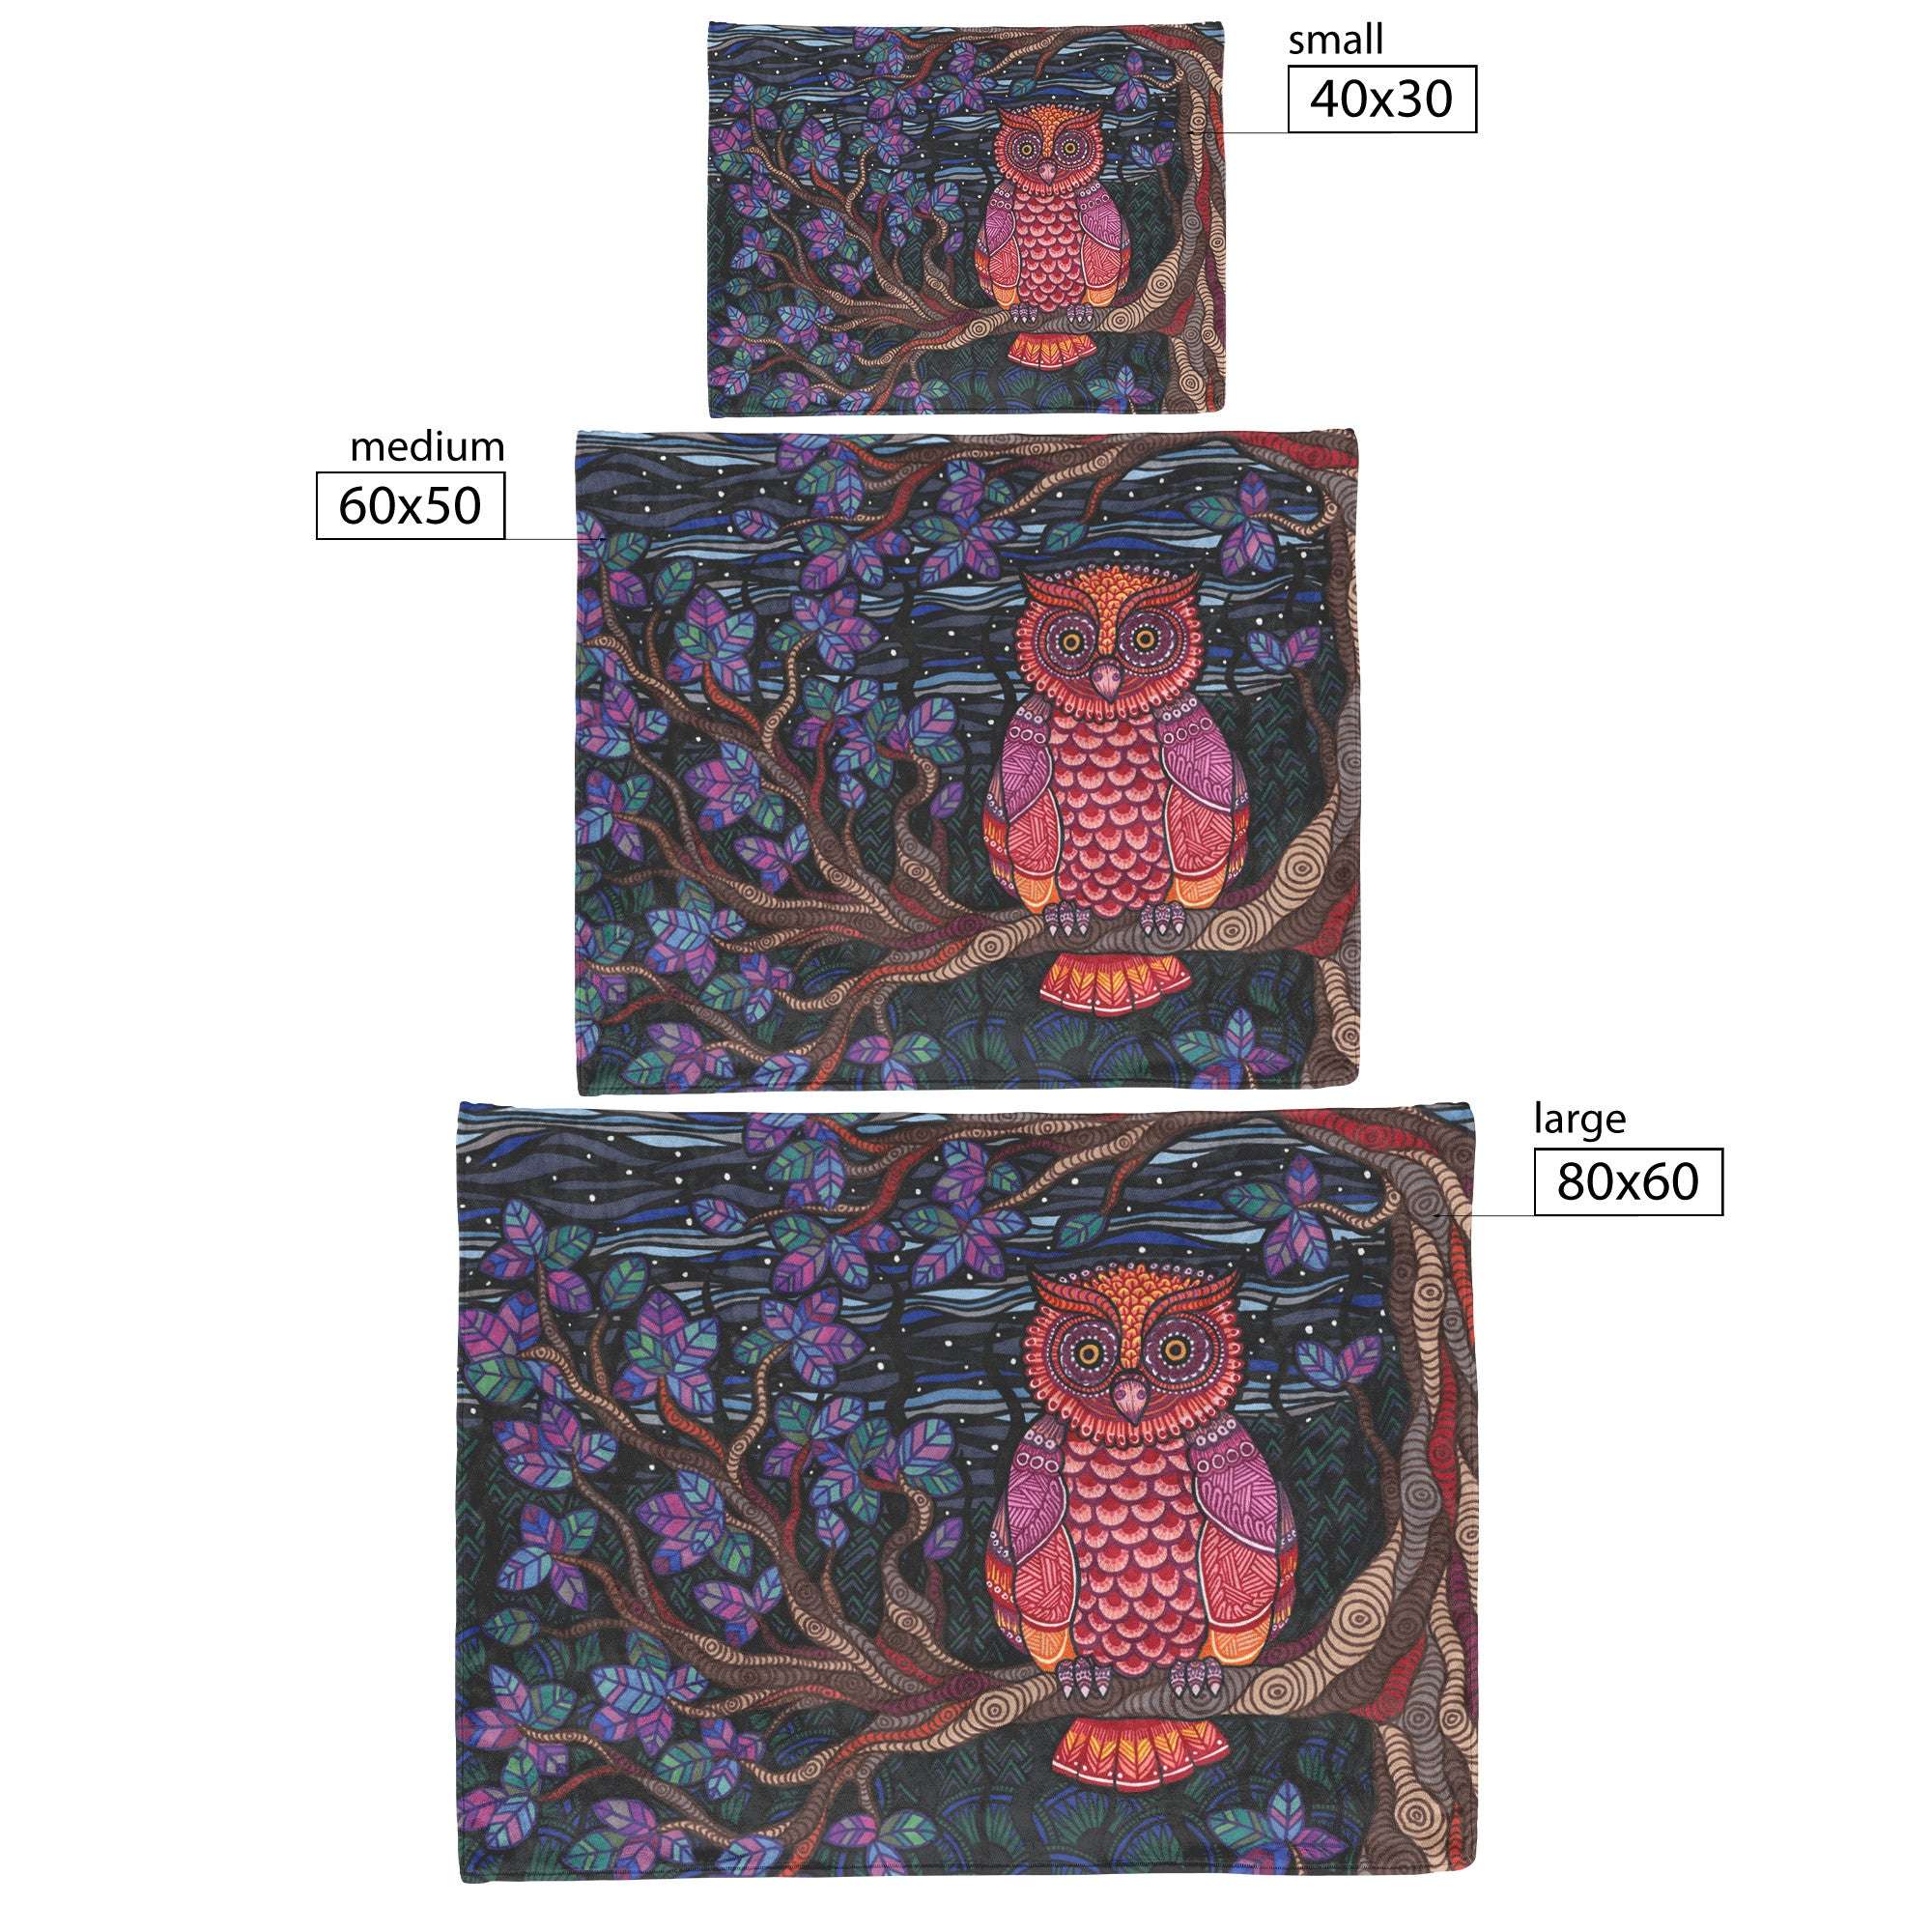 Three Owl Tree Blanket in different sizes: small (40x30), medium (60x50), and large (80x60), each featuring a colorful owl on a patterned background.